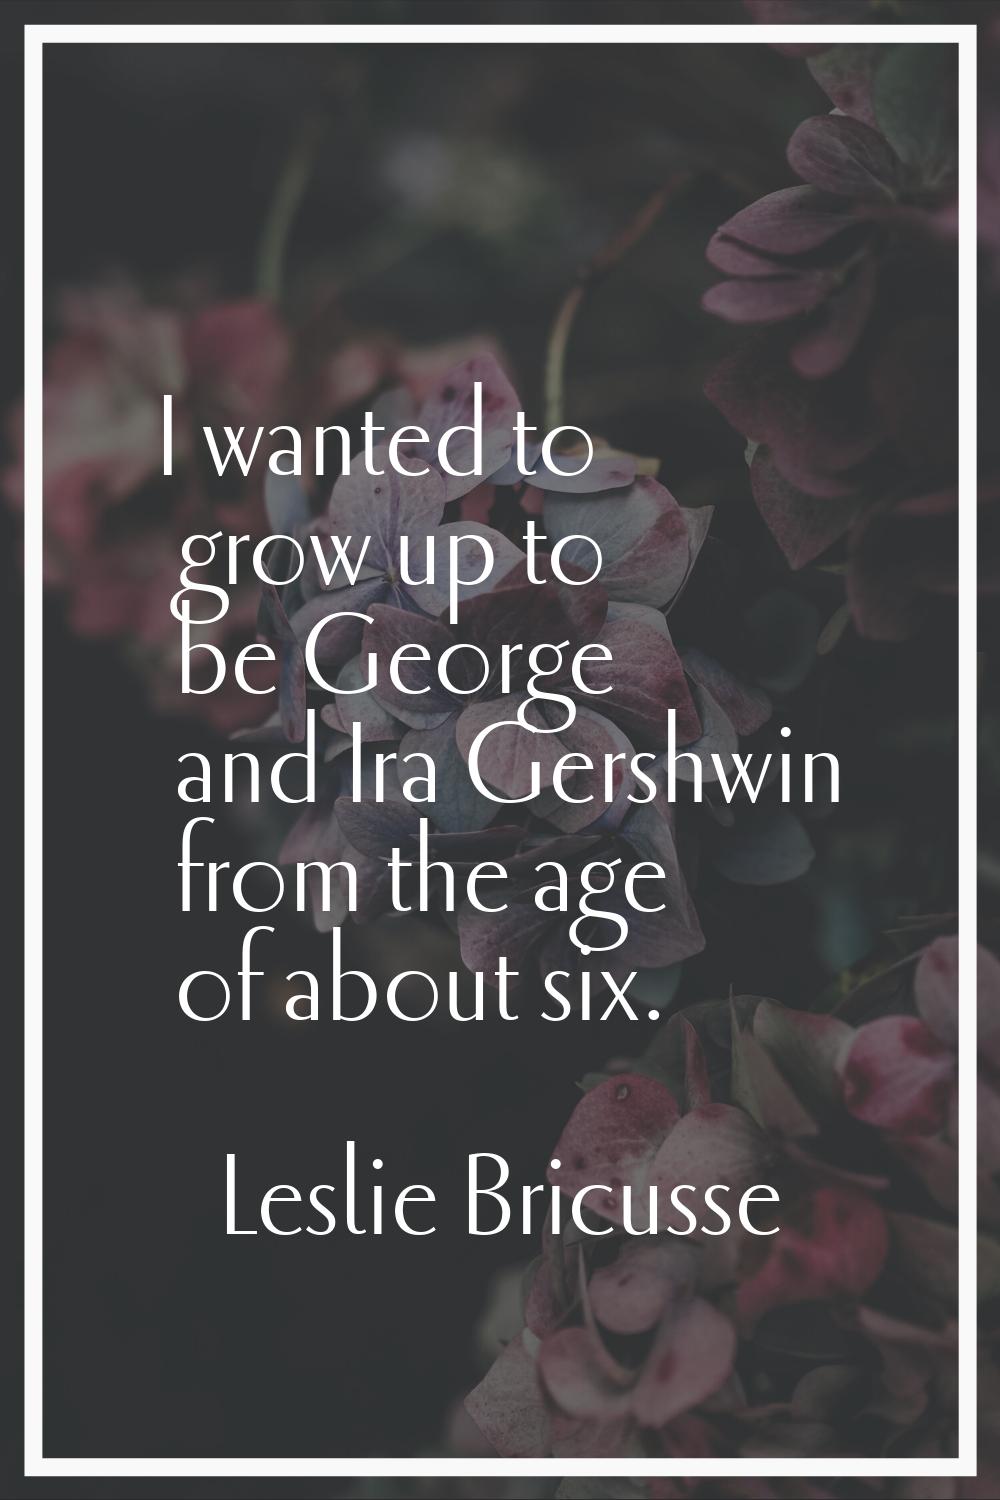 I wanted to grow up to be George and Ira Gershwin from the age of about six.